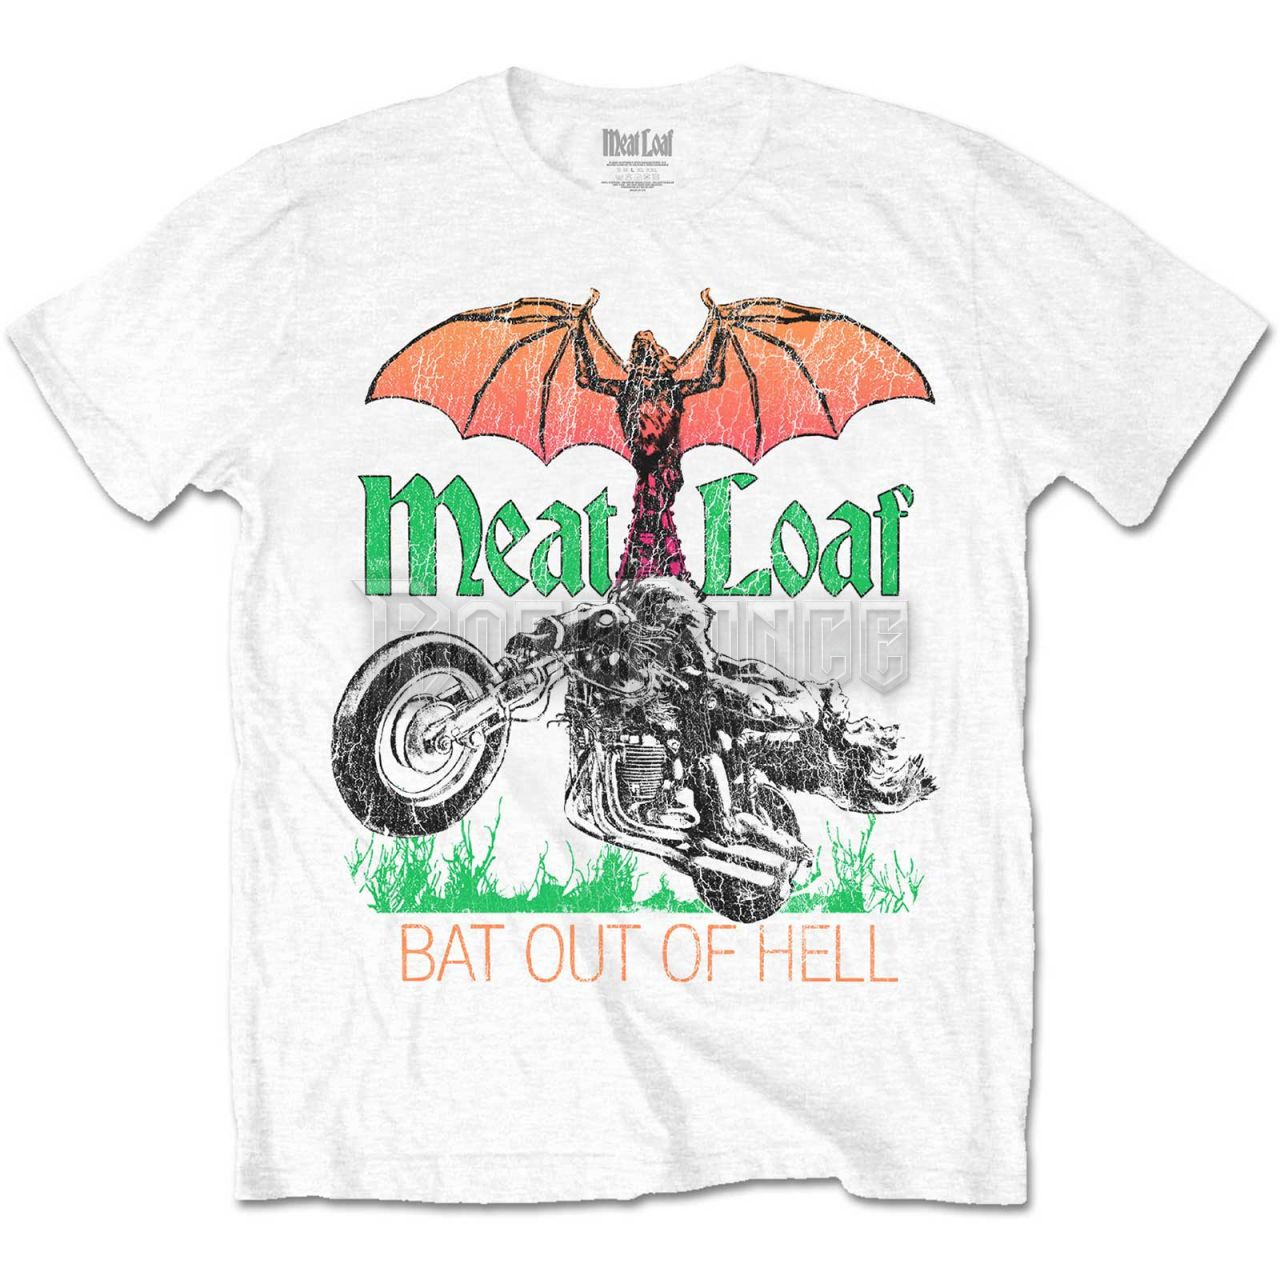 Meat Loaf - Bat Out Of Hell - unisex póló - MEATTS05MW